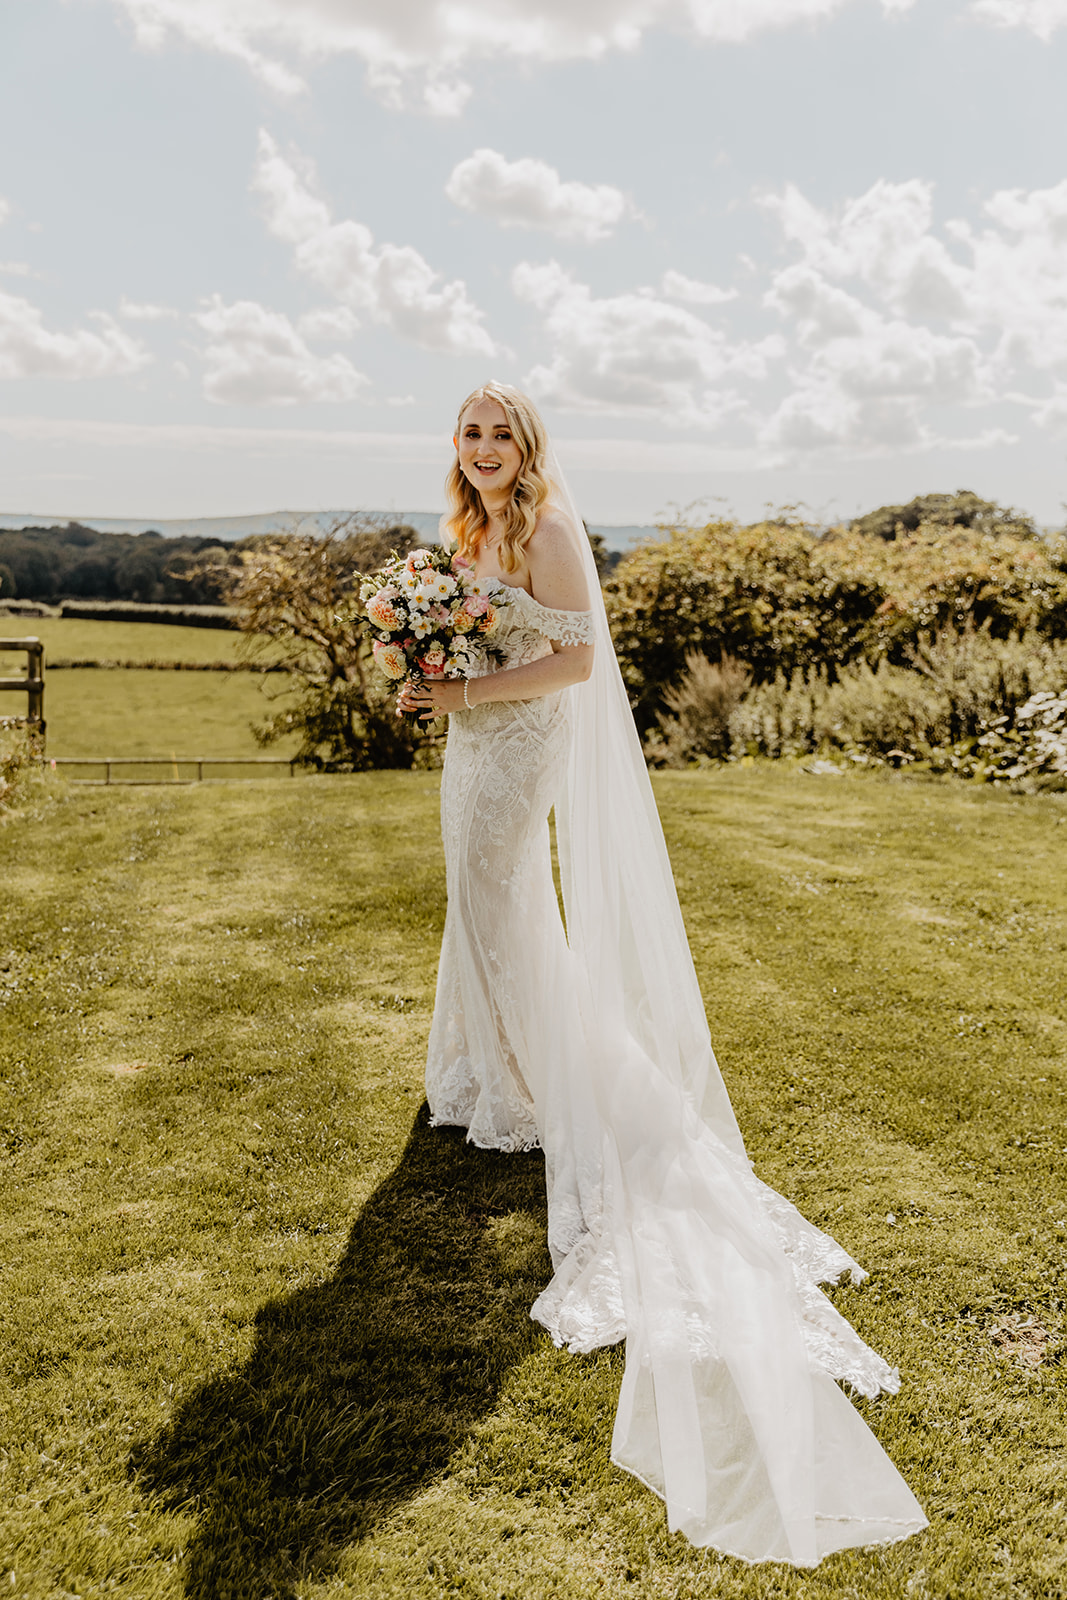 Bride at a Southlands barn wedding, Sussex. Photo by OliveJoy Photography.